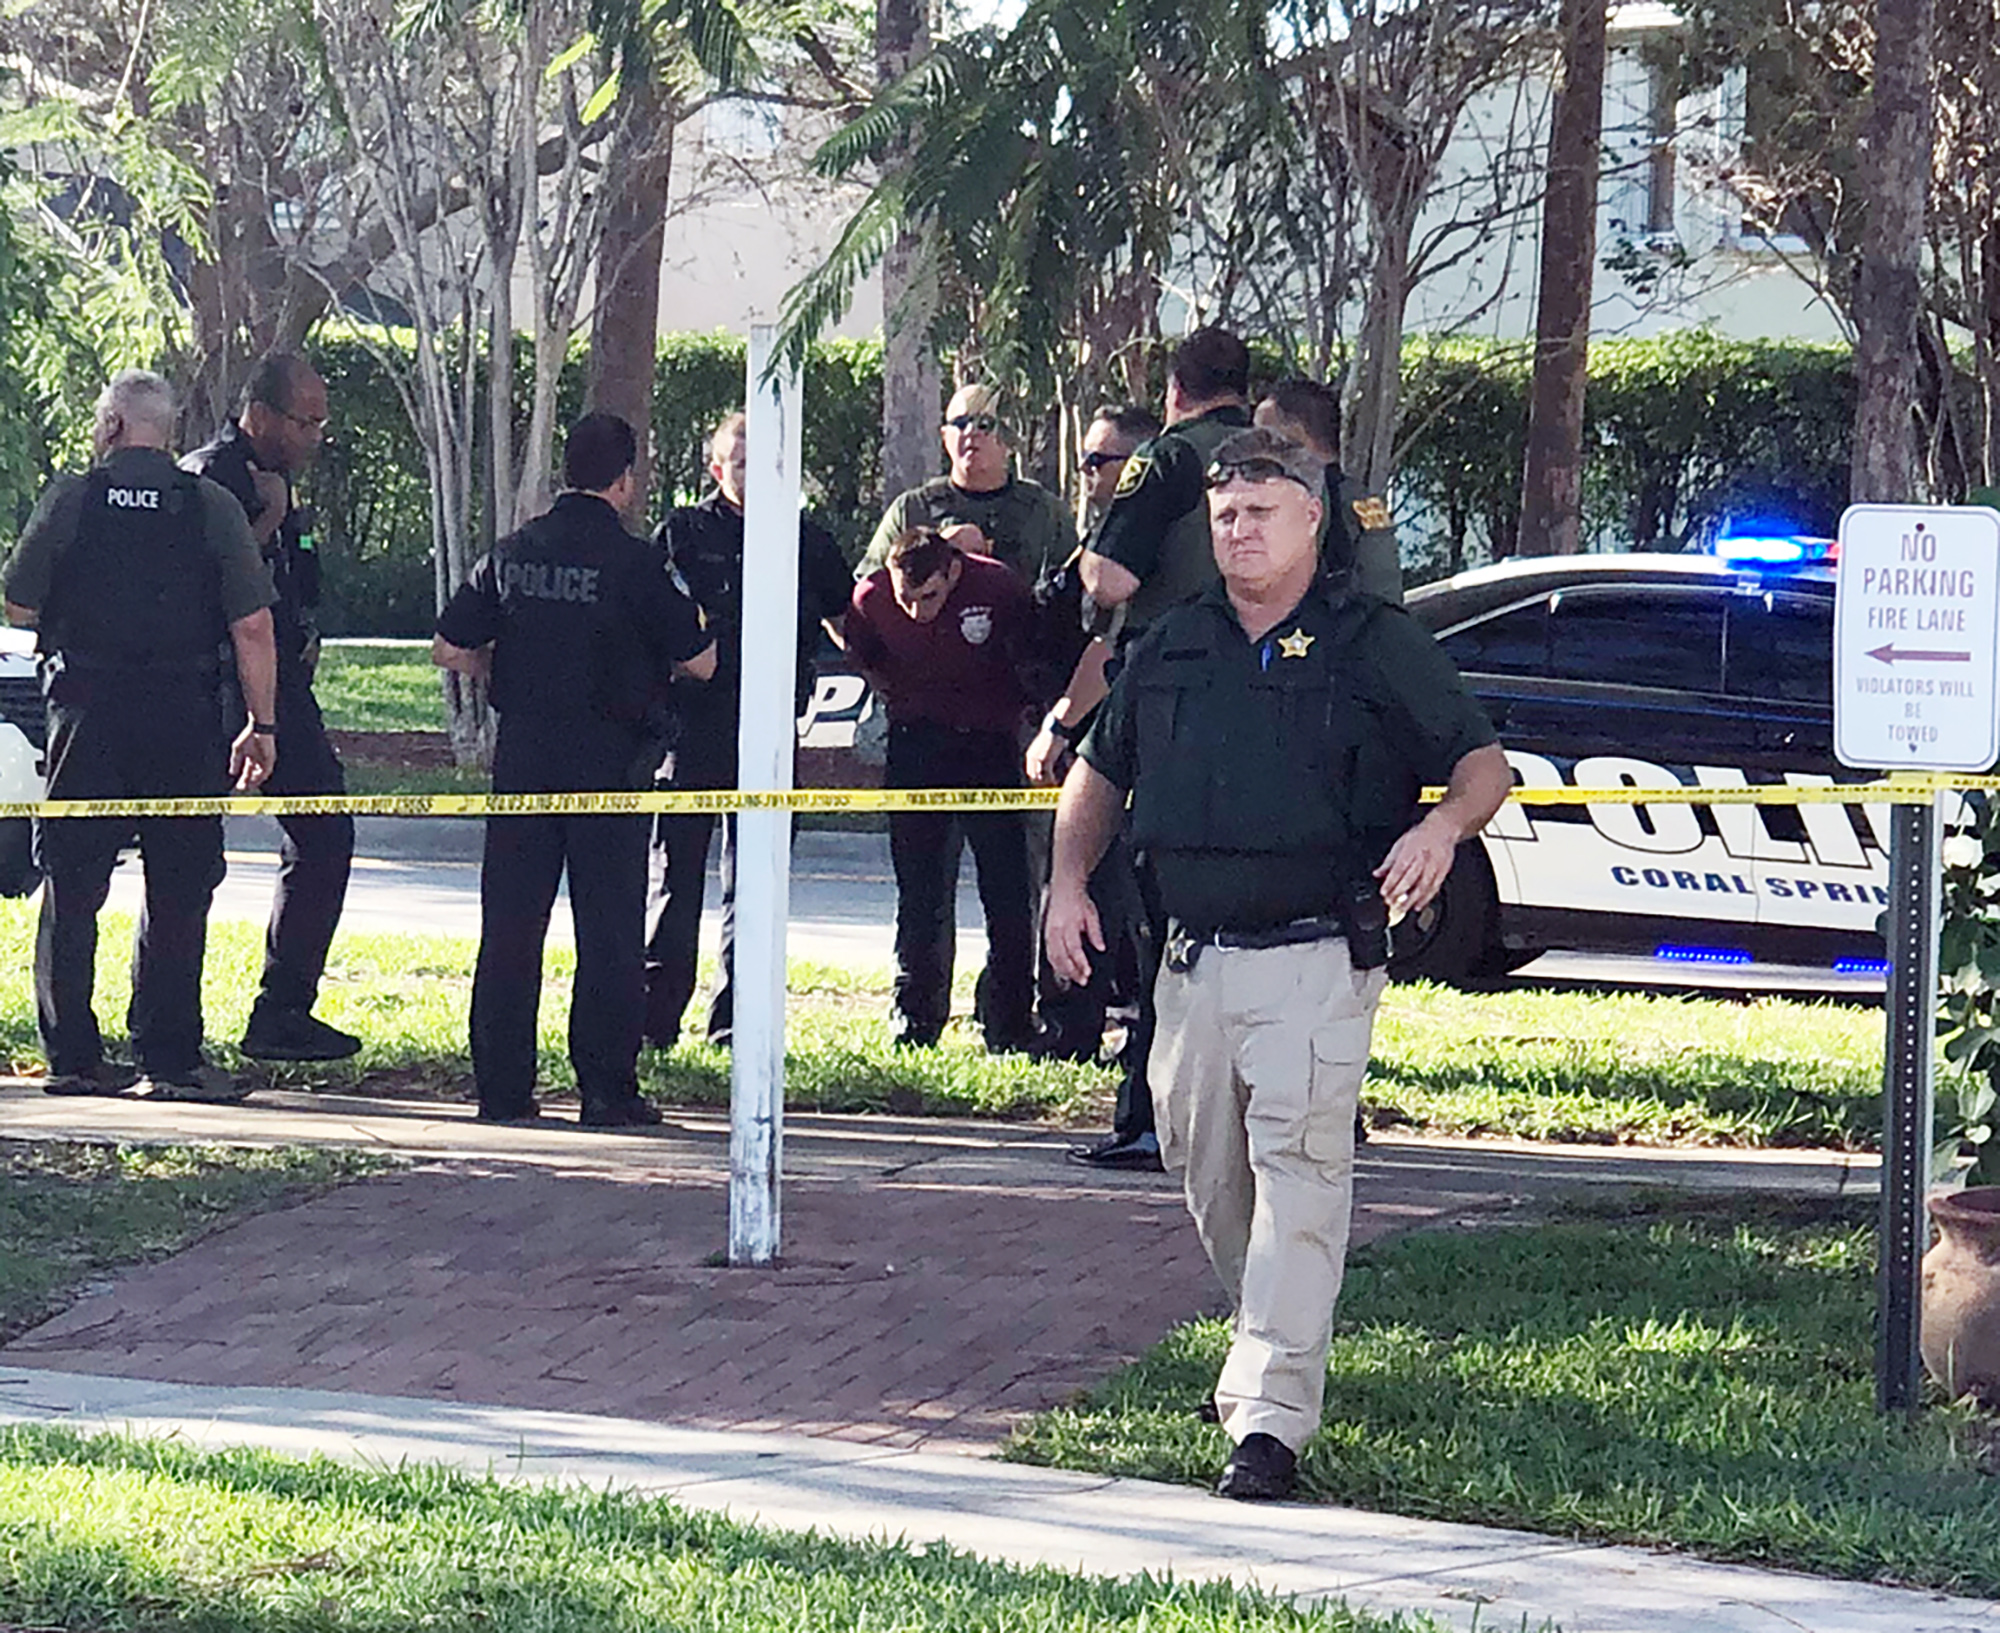 PHOTO: Nikolas Cruz is arrested by authorities after a shooting at Marjory Stoneman Douglas High School in Parkland, Fla., Feb. 14, 2018.